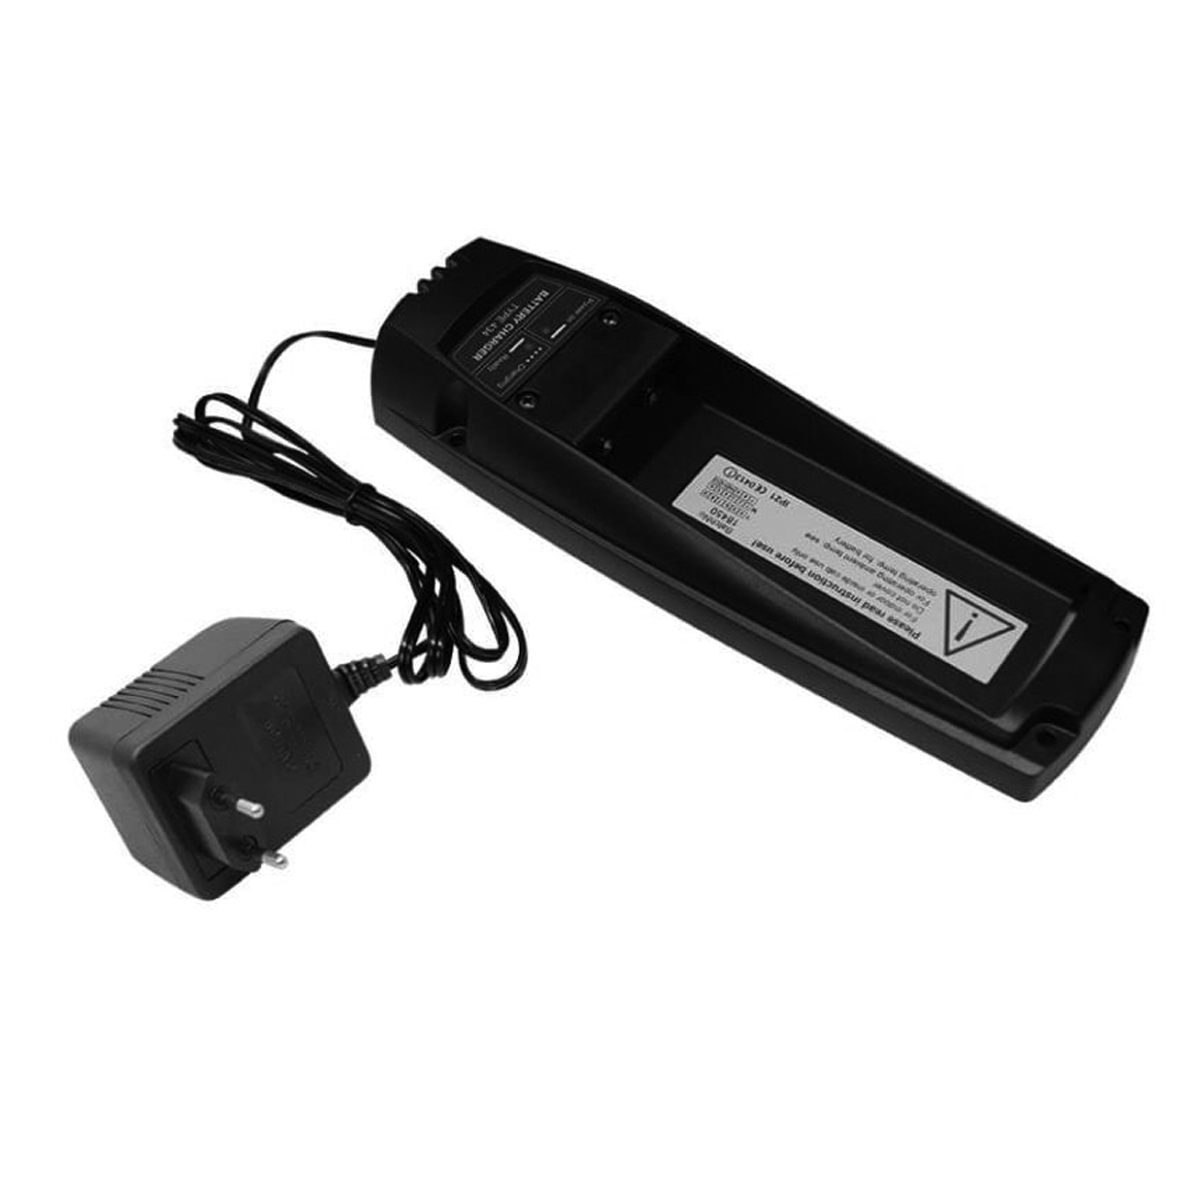 SCANRECO 434 : BATTERY CHARGER FOR 7.2V / TYPE 592 BATTERY